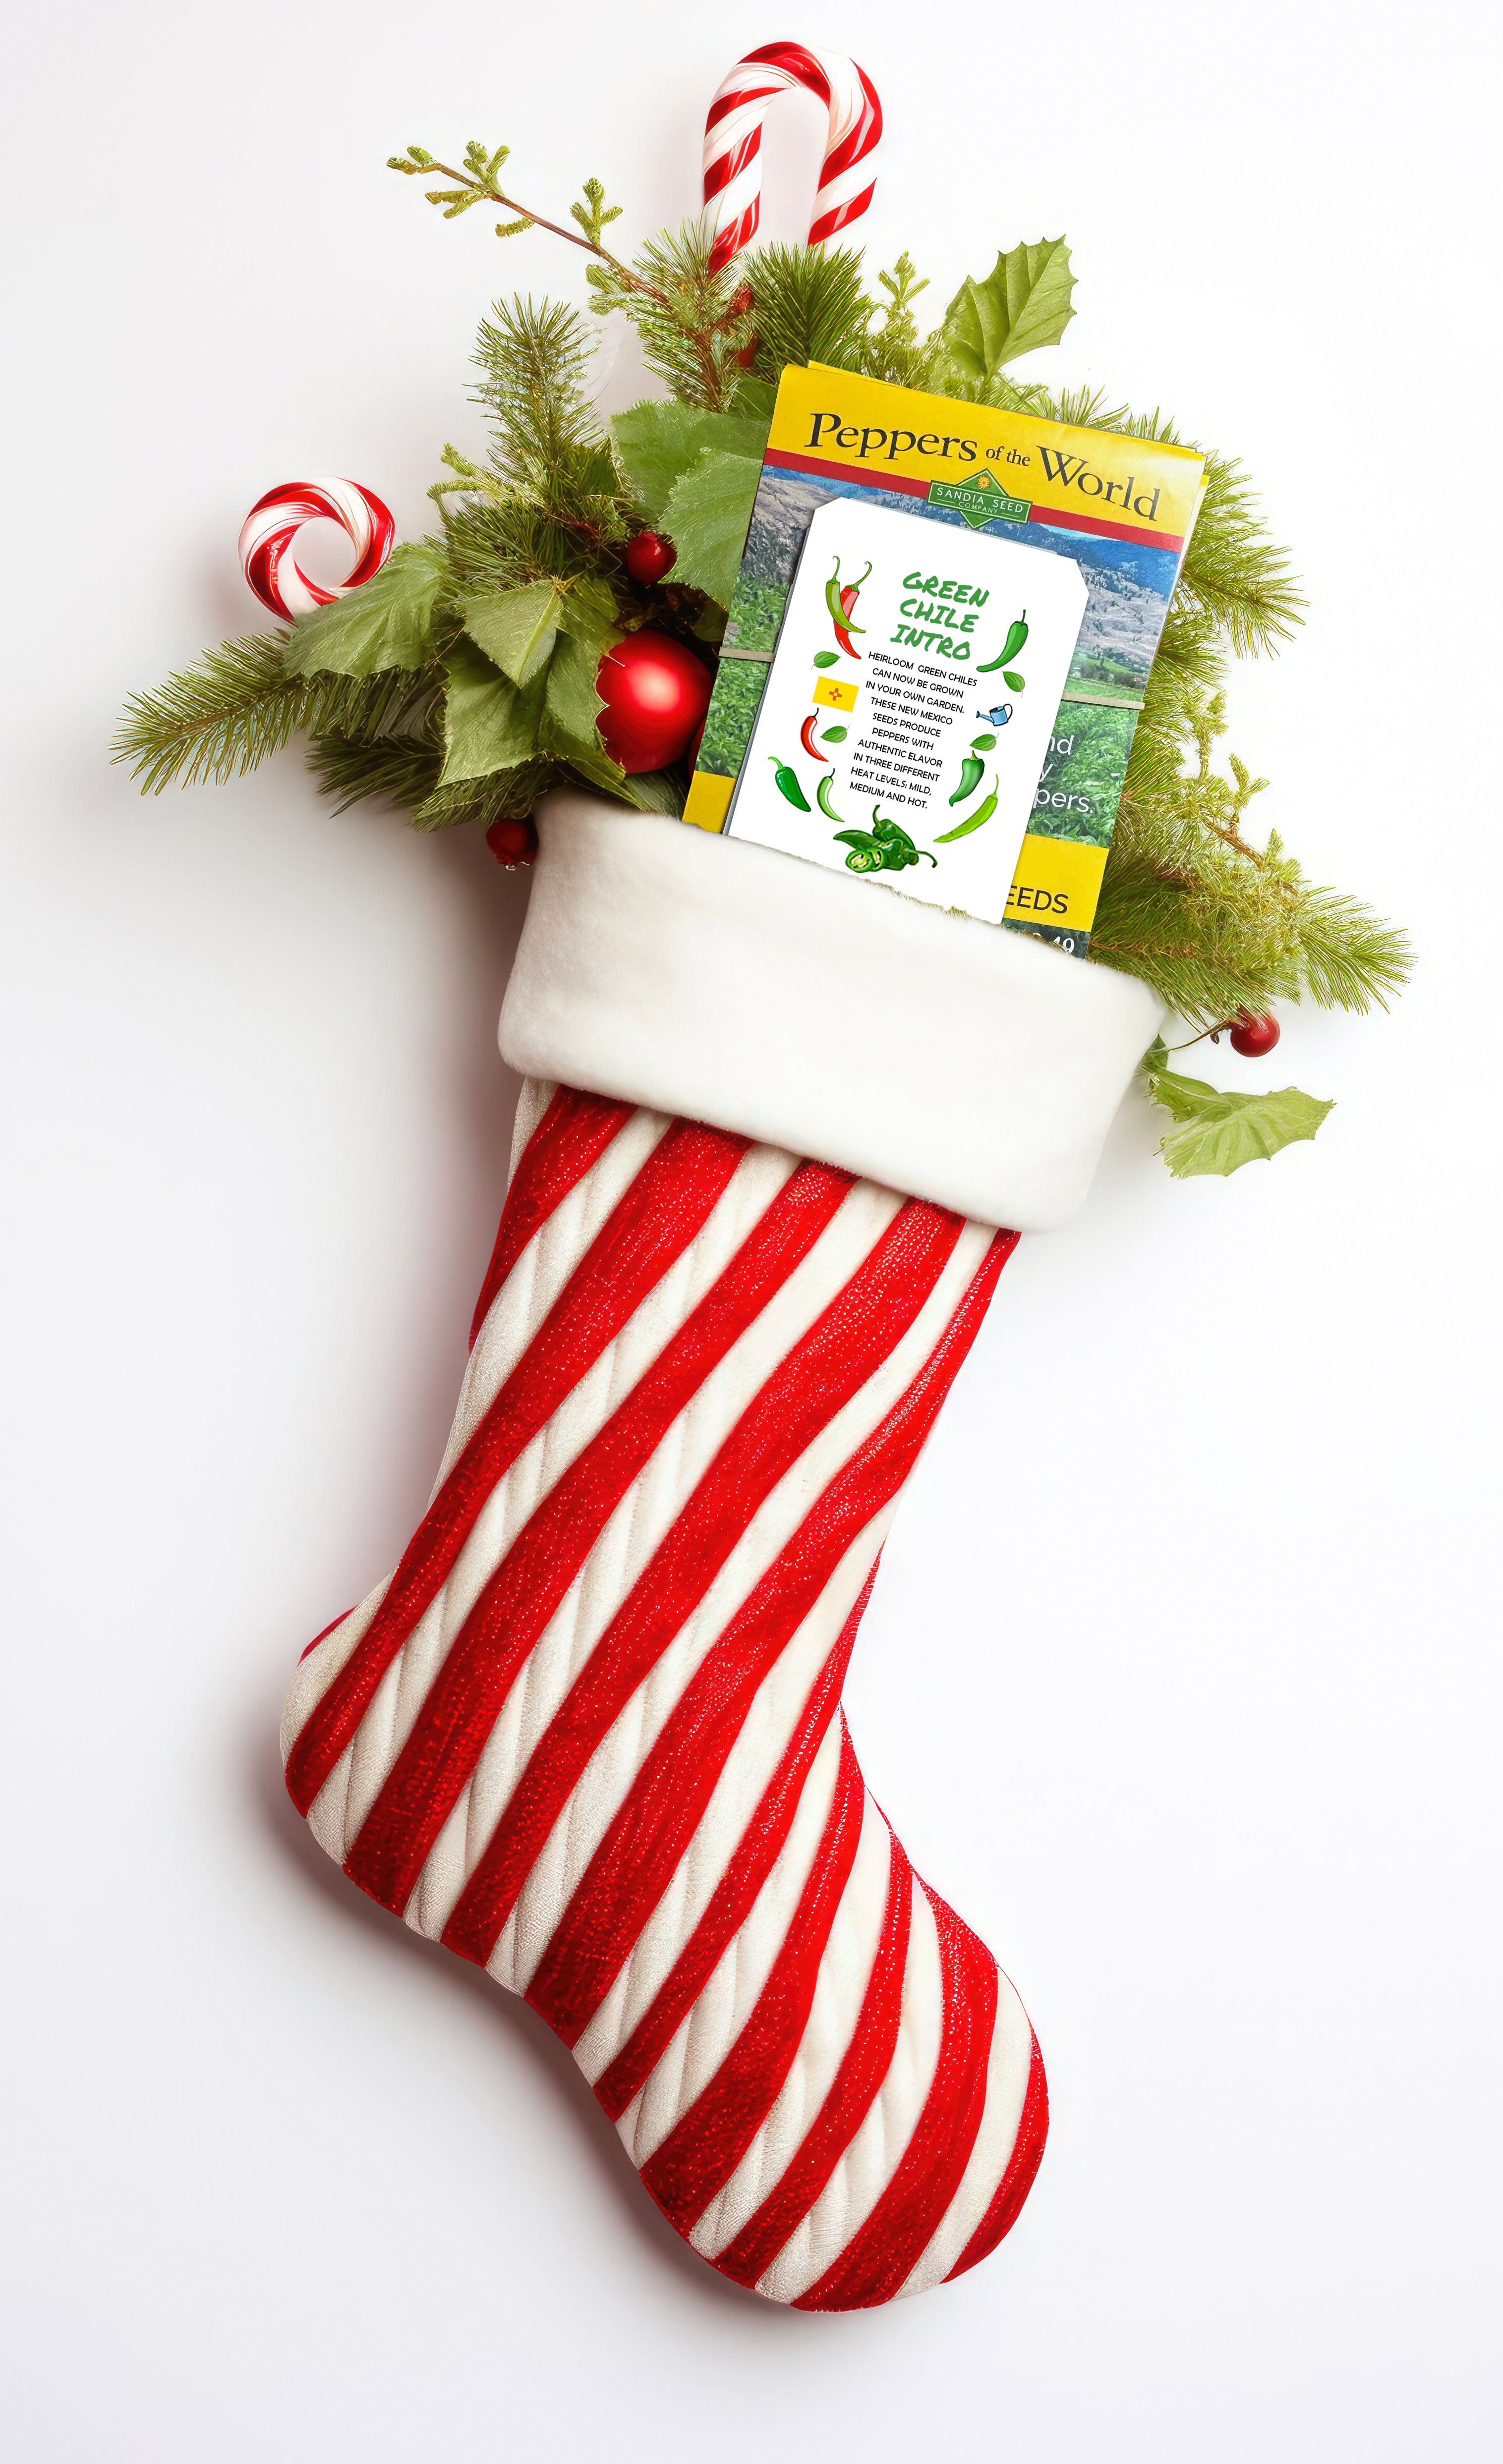 Pepper Gifts for Stocking Stuffers